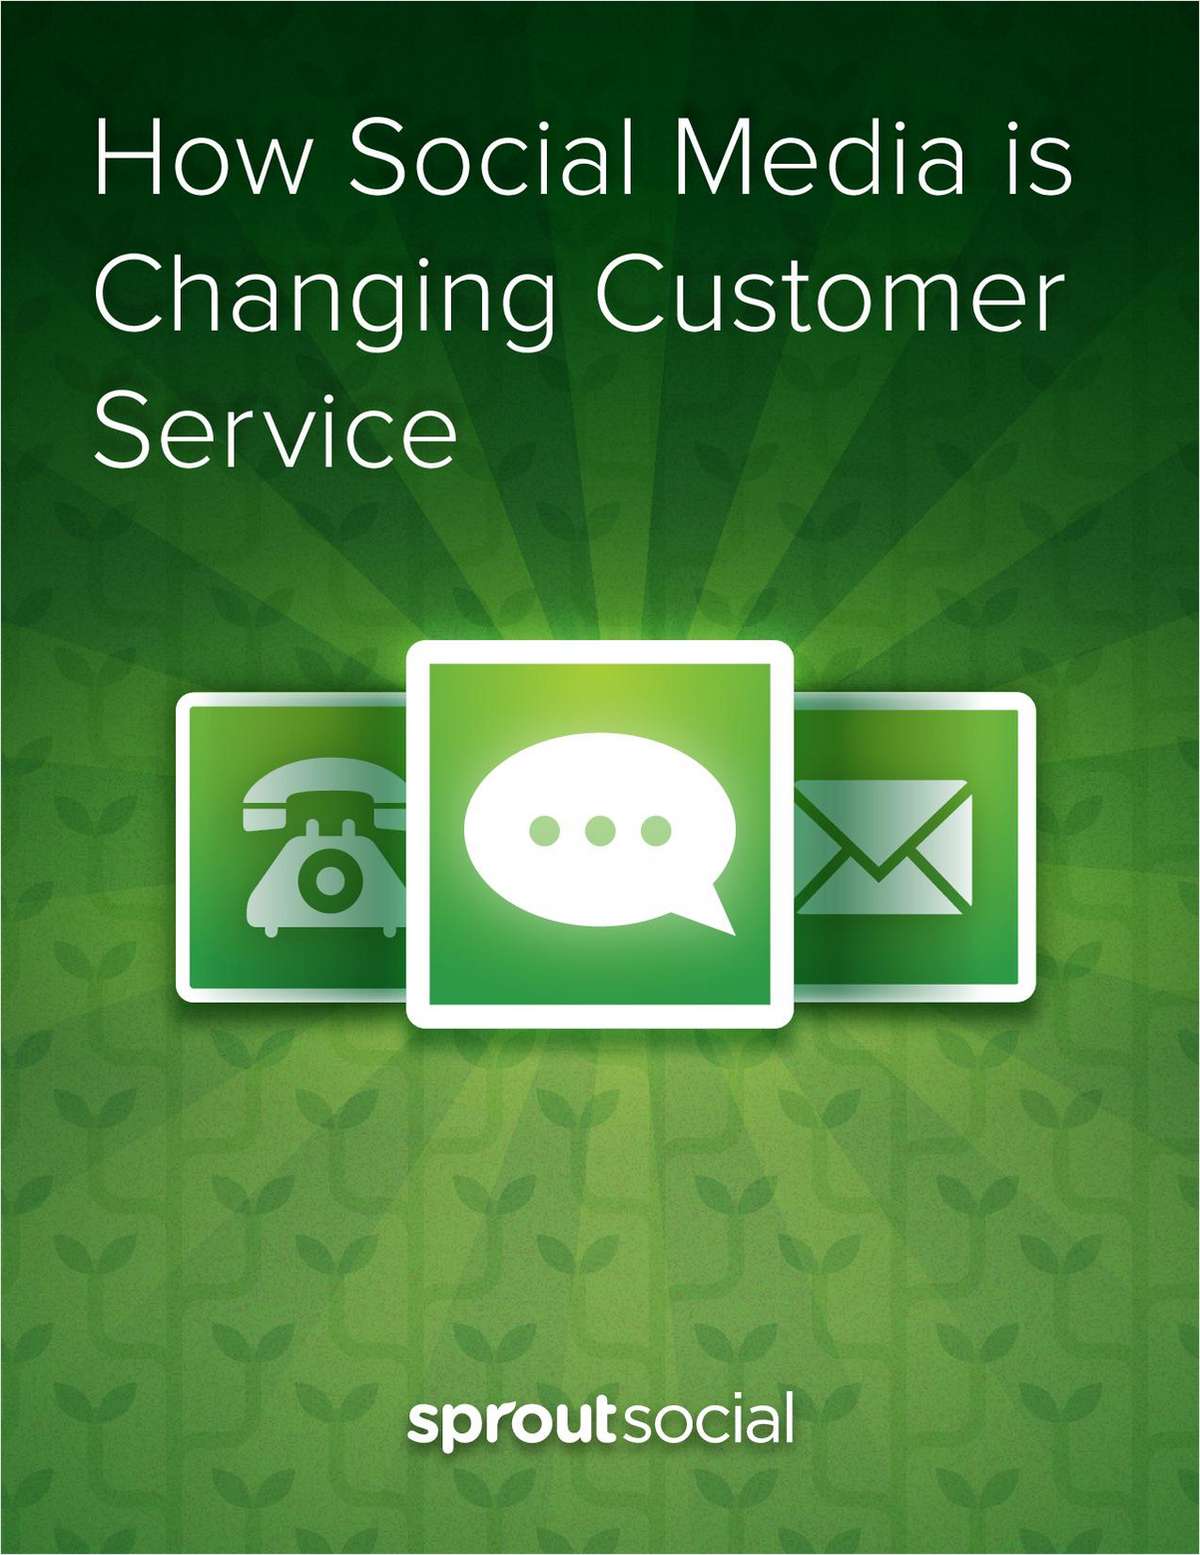 How Social Media is Changing Customer Service